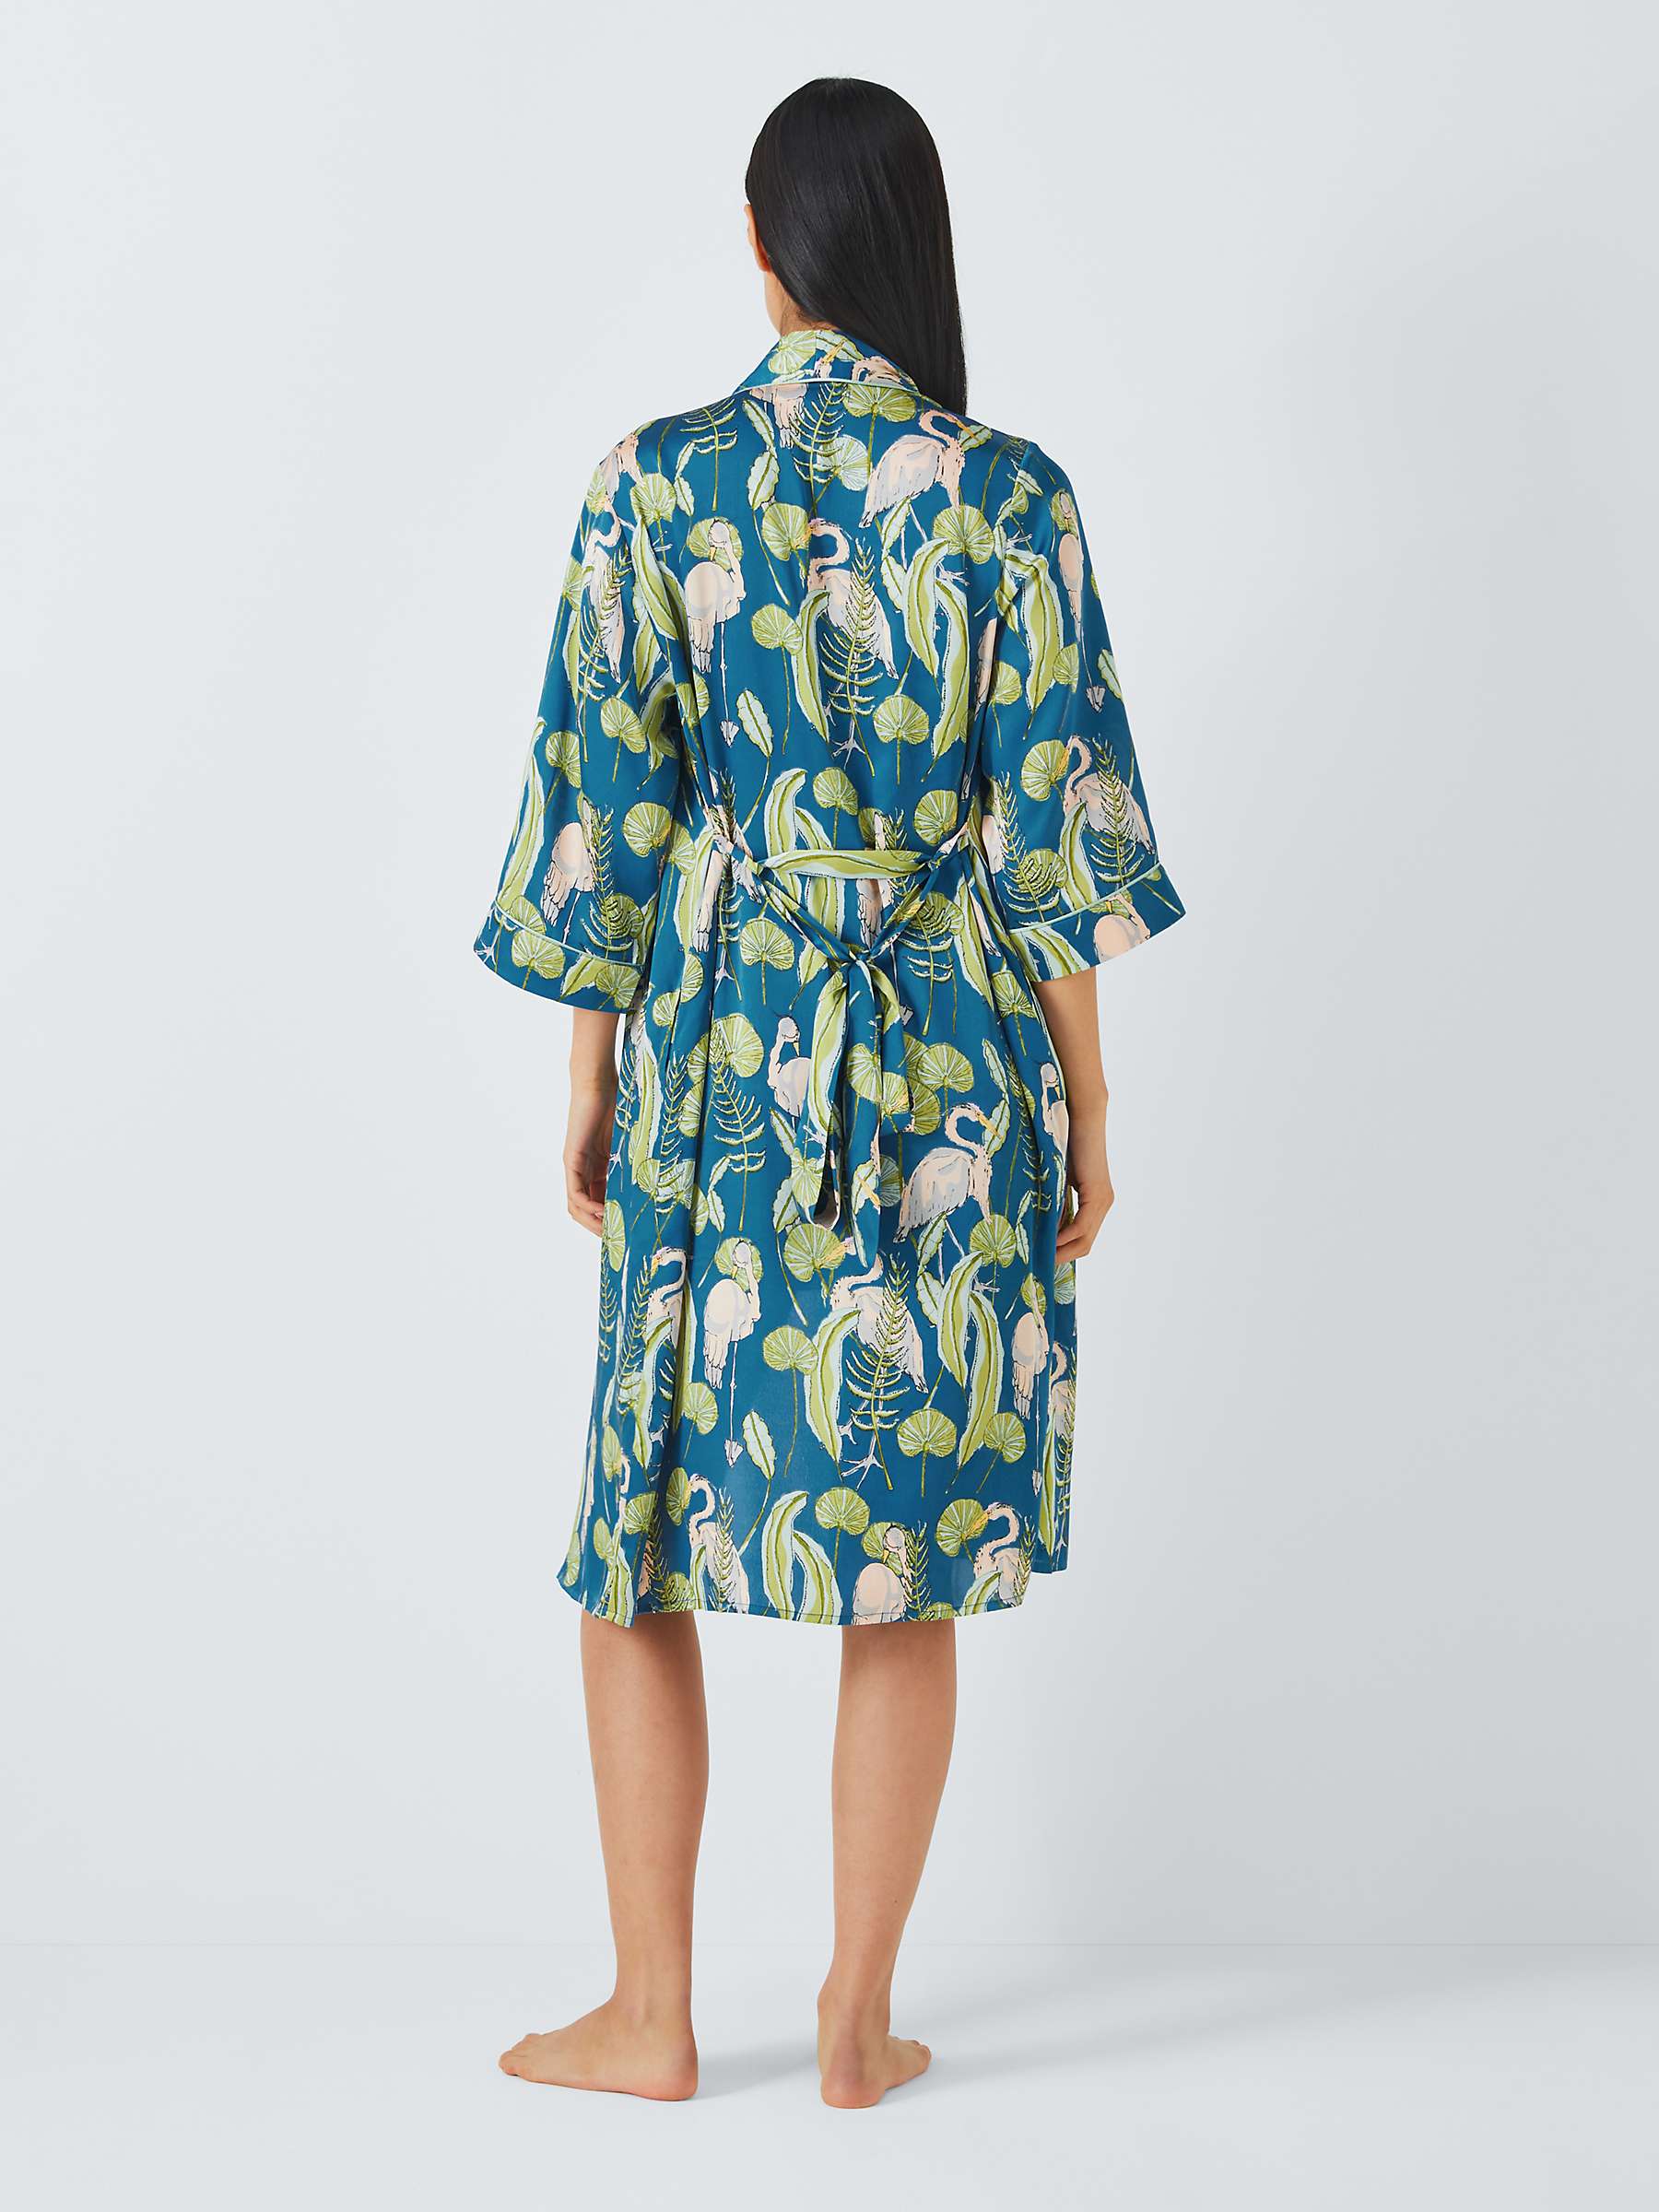 Buy Their Nibs Crane Satin Dressing Gown Robe, Teal Online at johnlewis.com